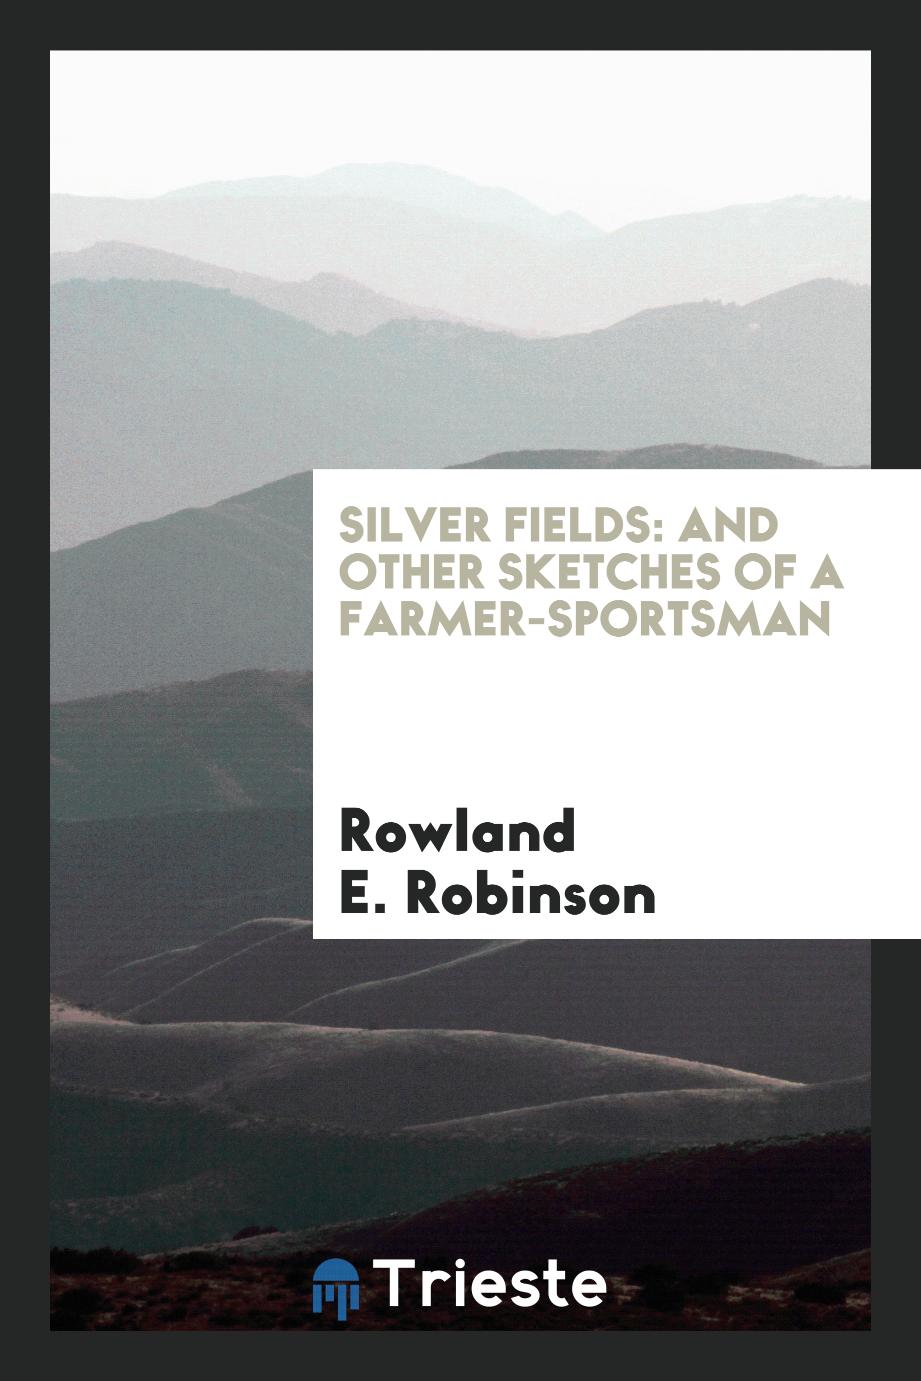 Rowland E.  Robinson - Silver fields: and other sketches of a farmer-sportsman